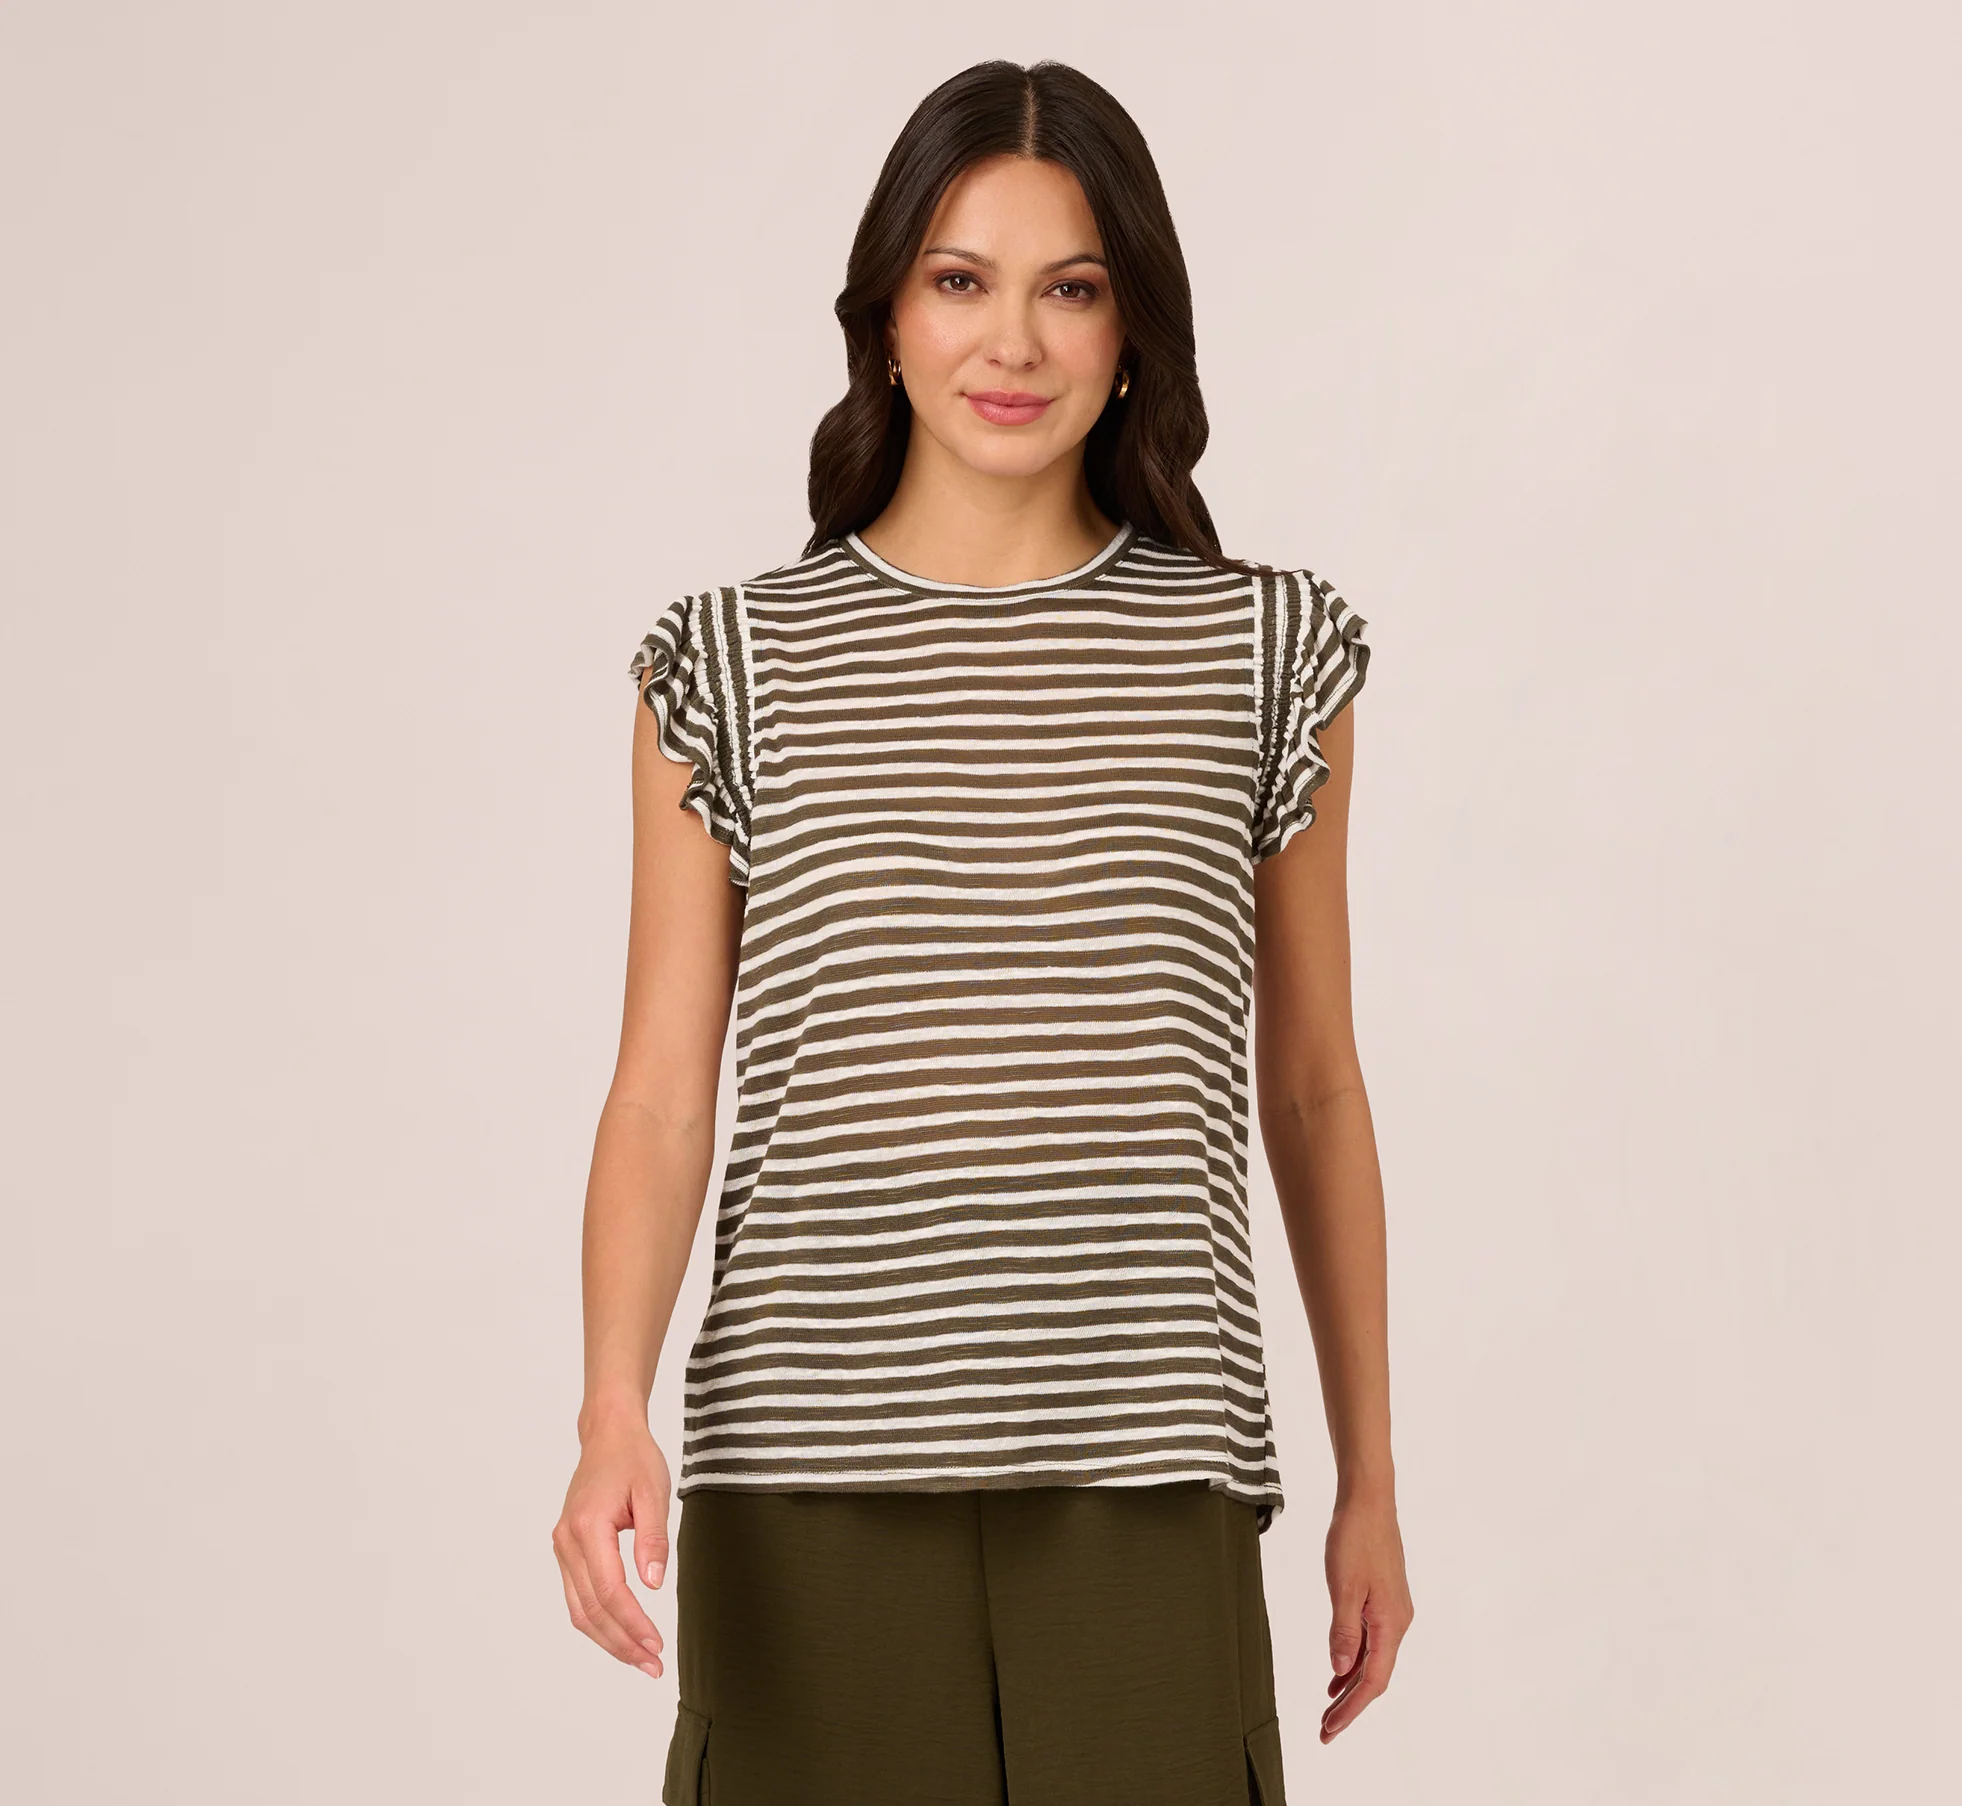 STRIPED TEE WITH RUFFLE SLEEVES IN DK GREEN WHITE